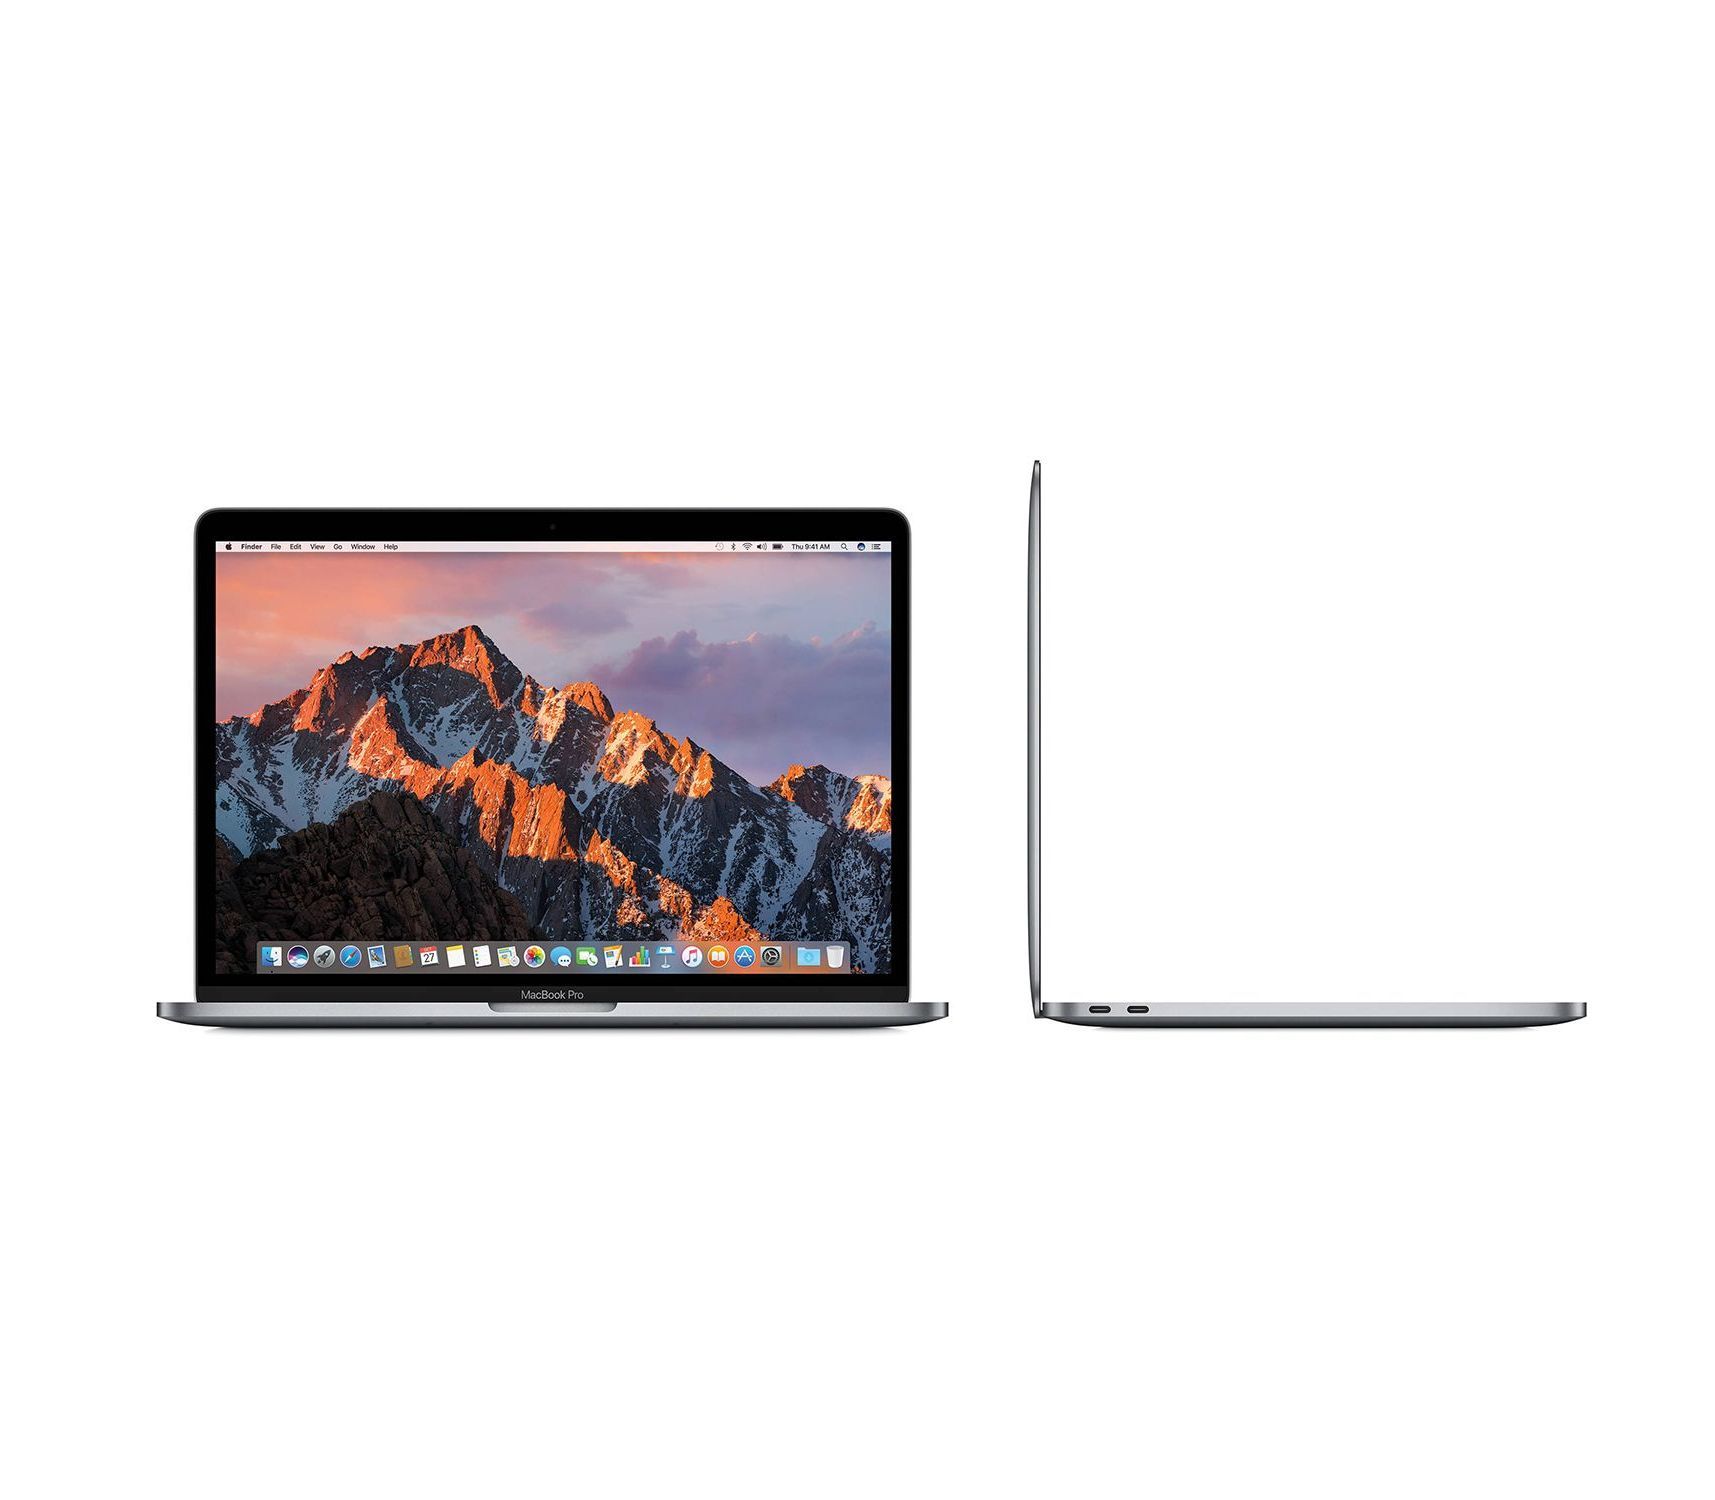 Latest Apple MacBook Pro 13" Display with Touch Bar Intel Core i5 512GB SSD Laptop